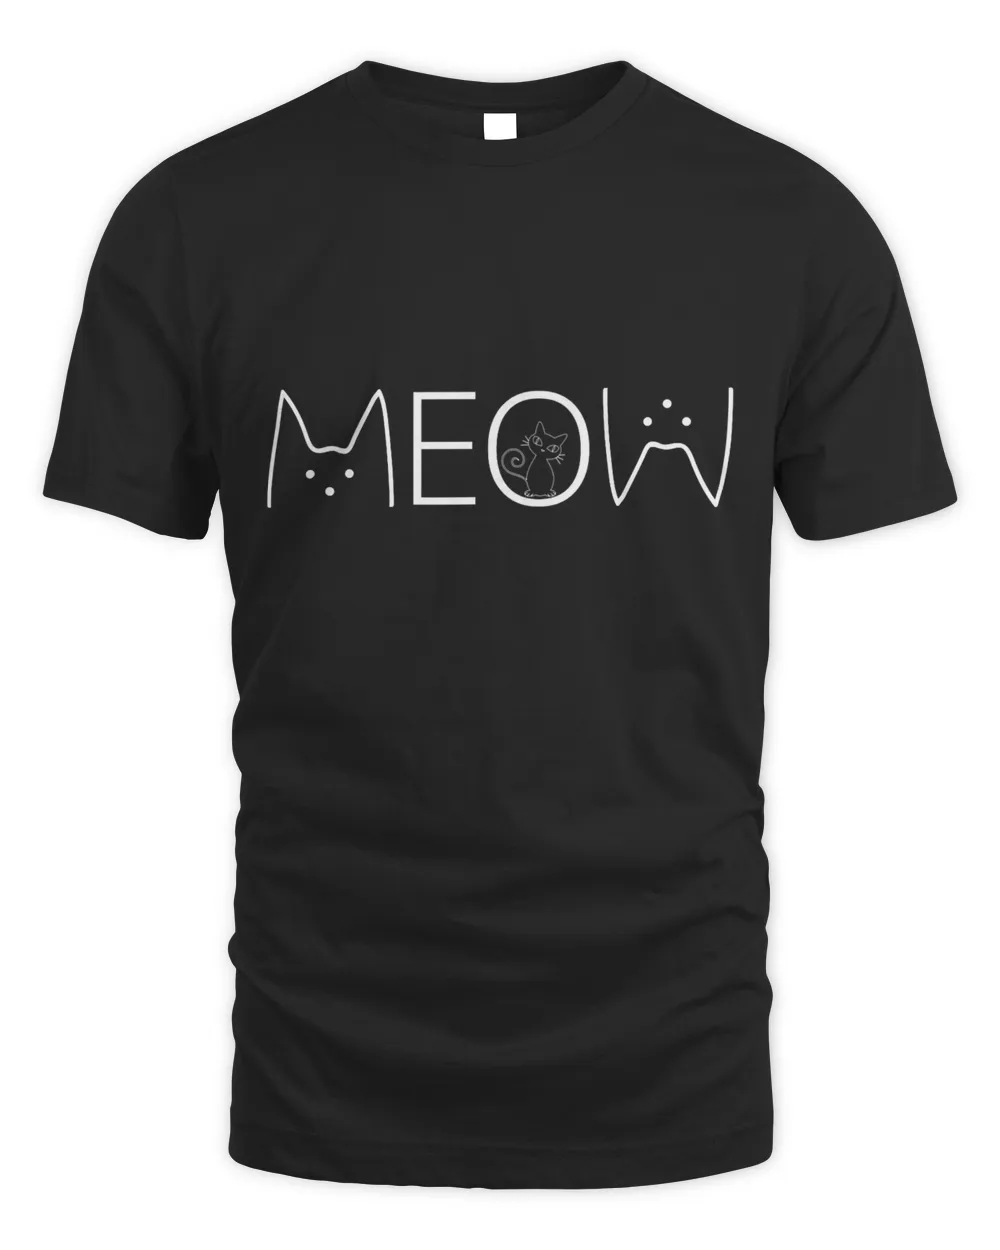 meow funny cat typographic Feature bullet T-Shirt